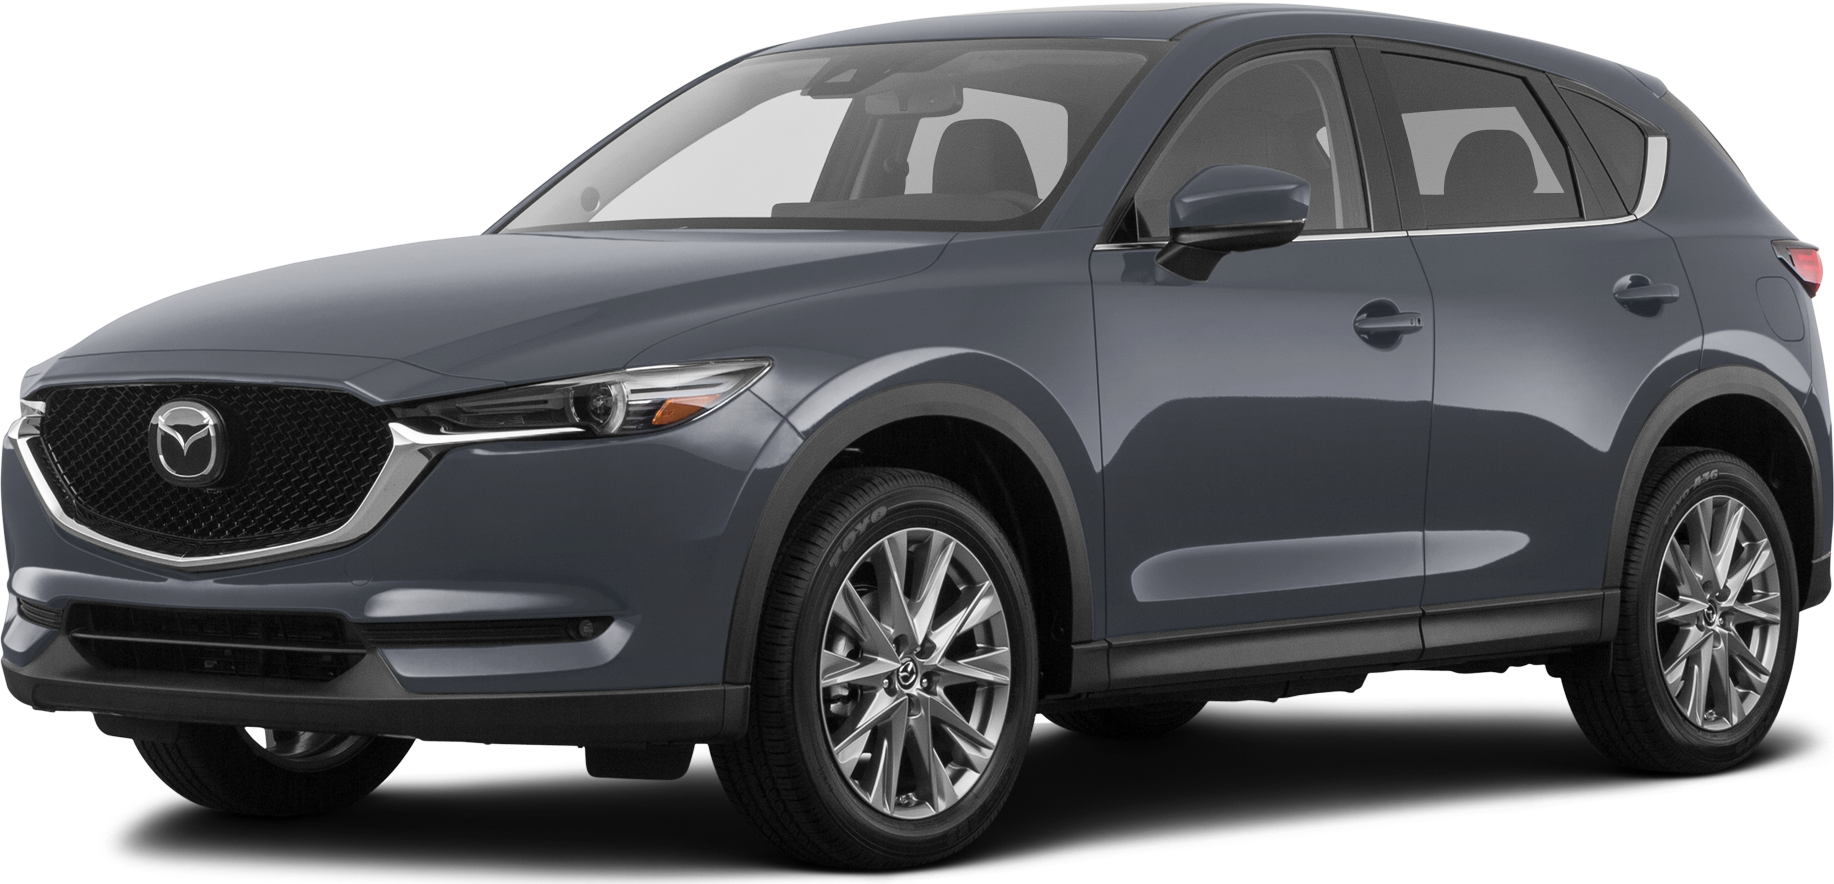 2021 Mazda Cx 5 Price Value Ratings And Reviews Kelley Blue Book